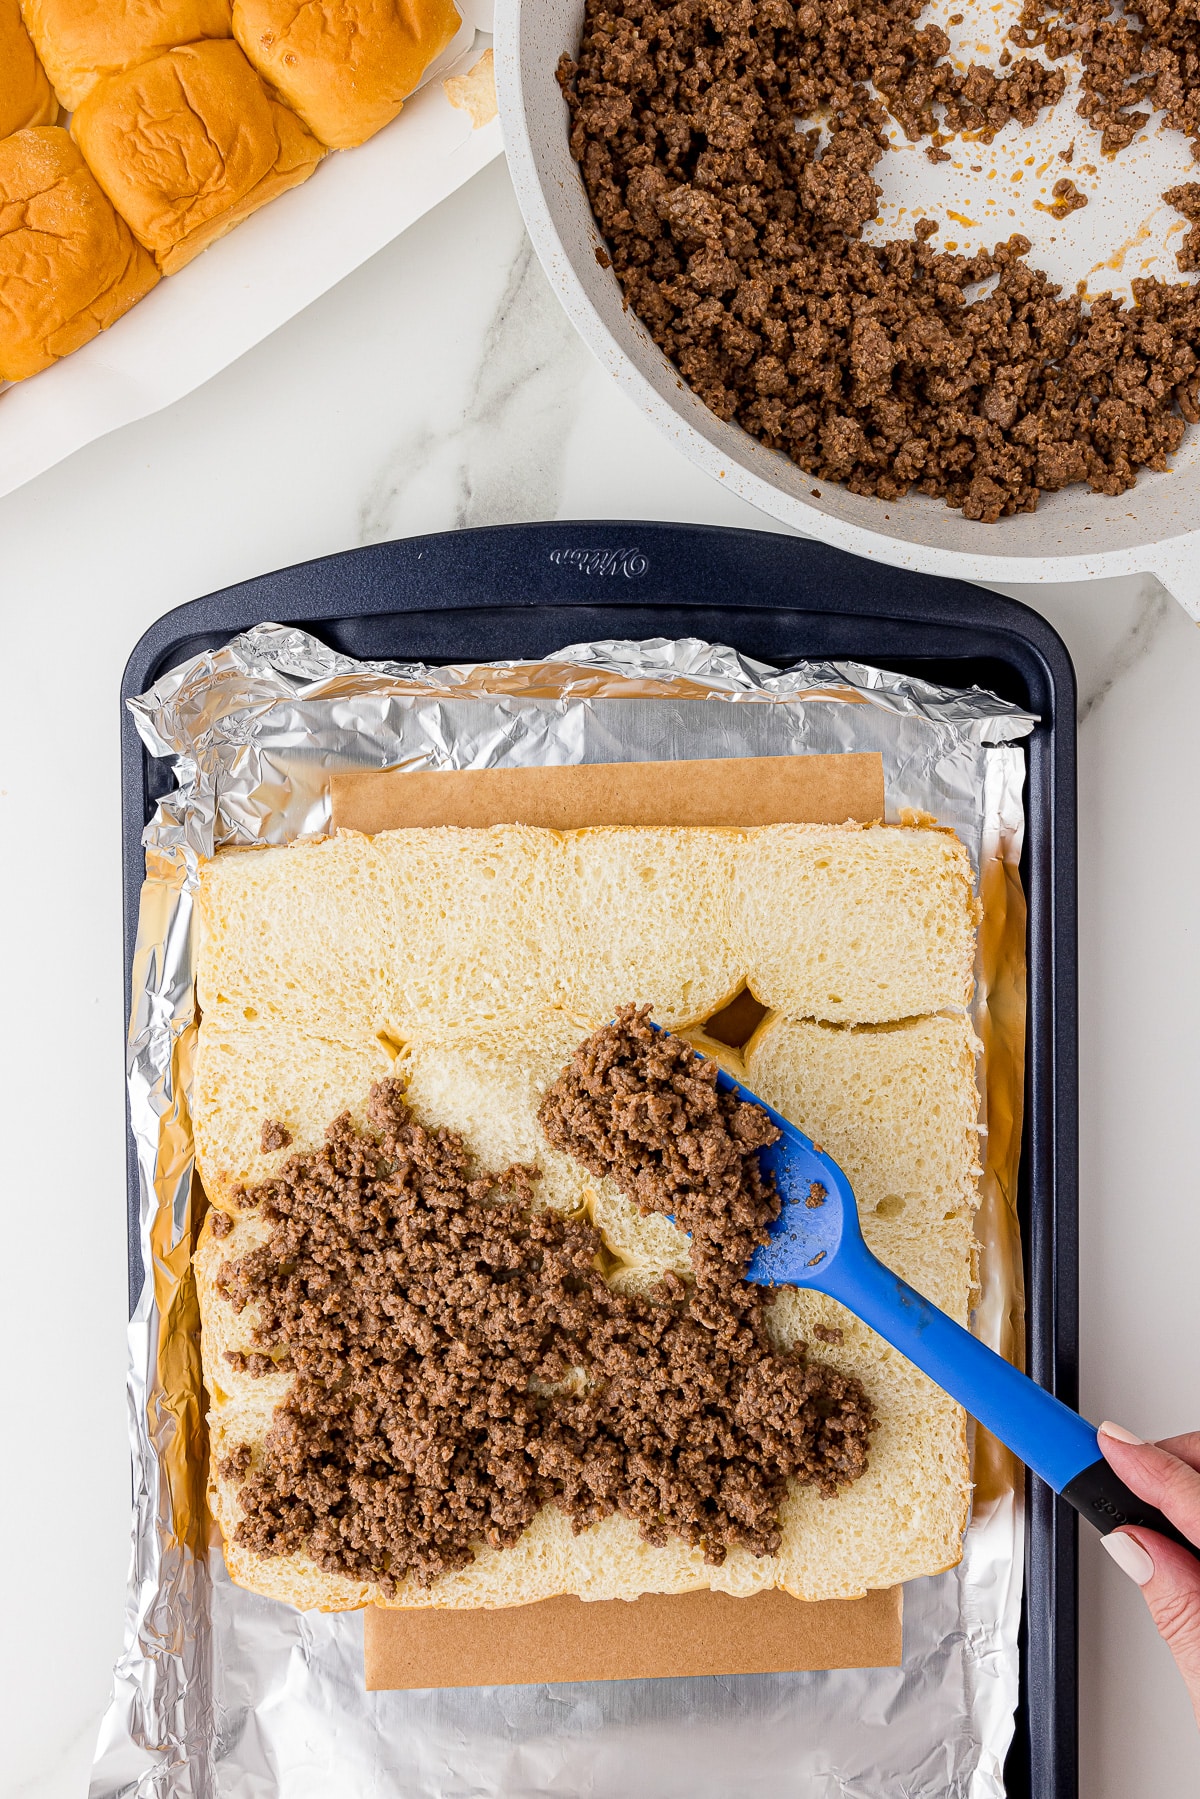 blue spatula spreading cooked ground meat onto Hawaiian rolls in a navy cookie sheet lined with foil, rolls and a frying pan with more cooked hamburger in the back